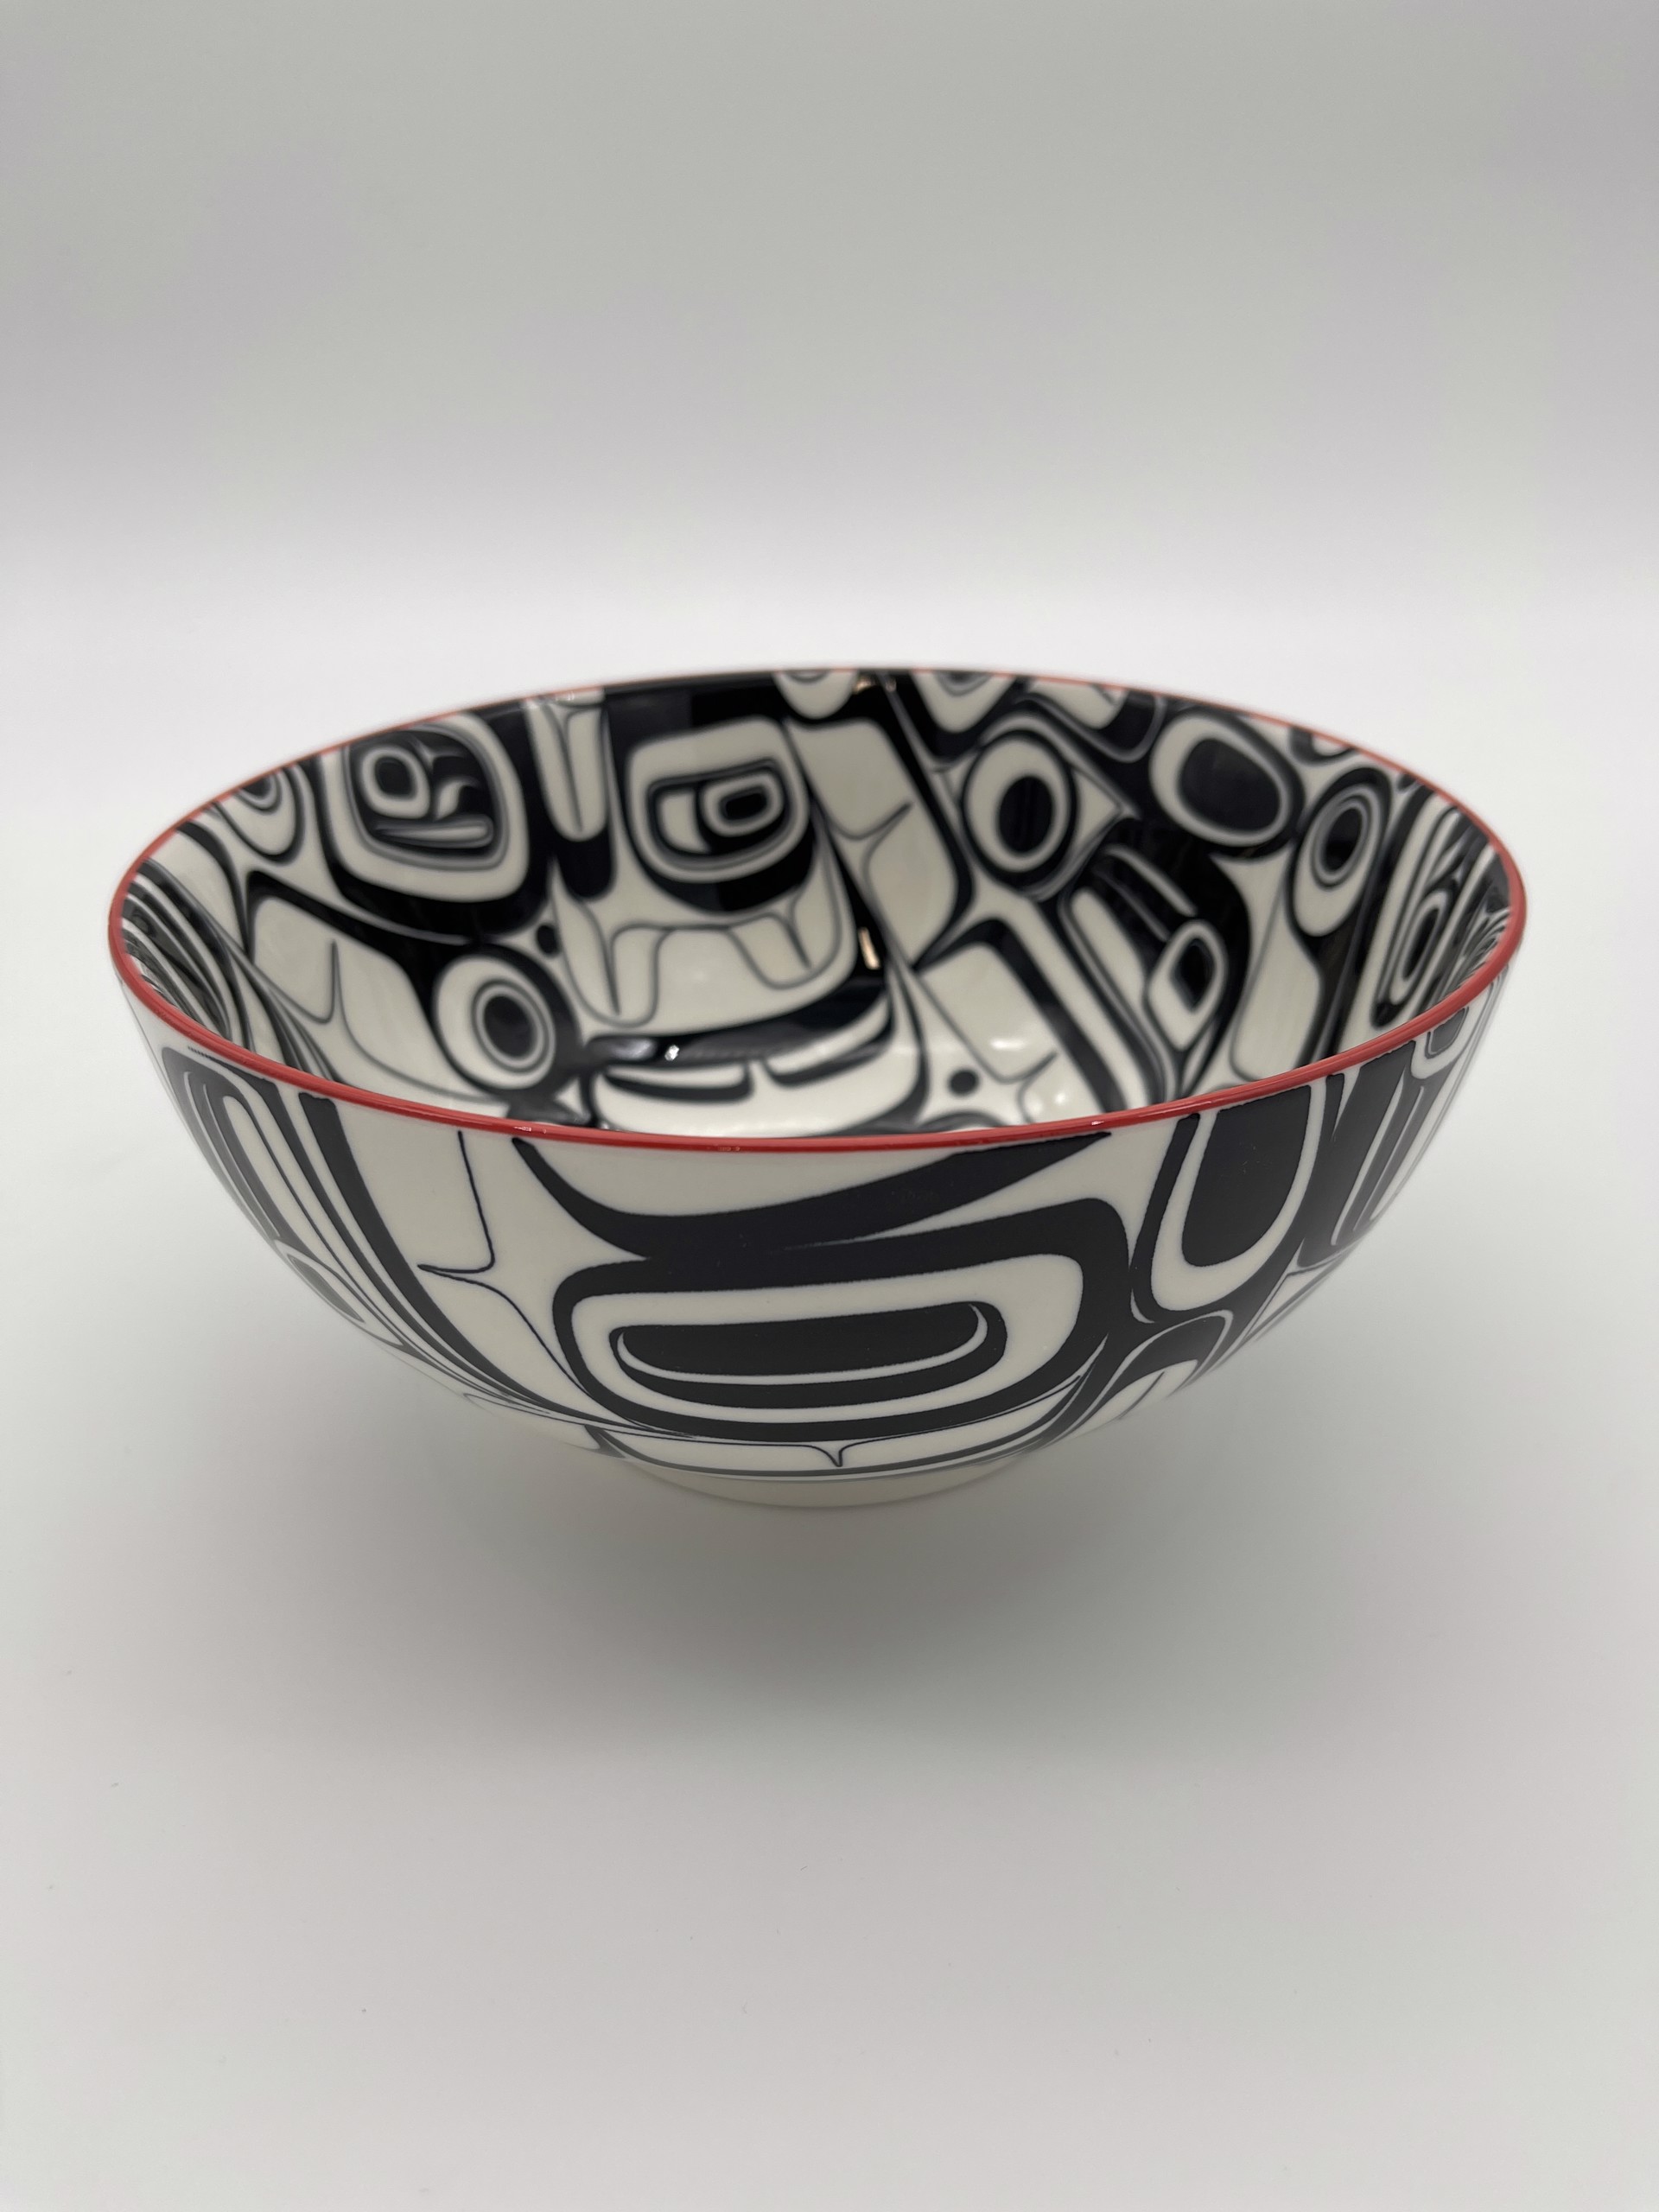 Raven Large Bowl Red/Black by Kelly Robinson